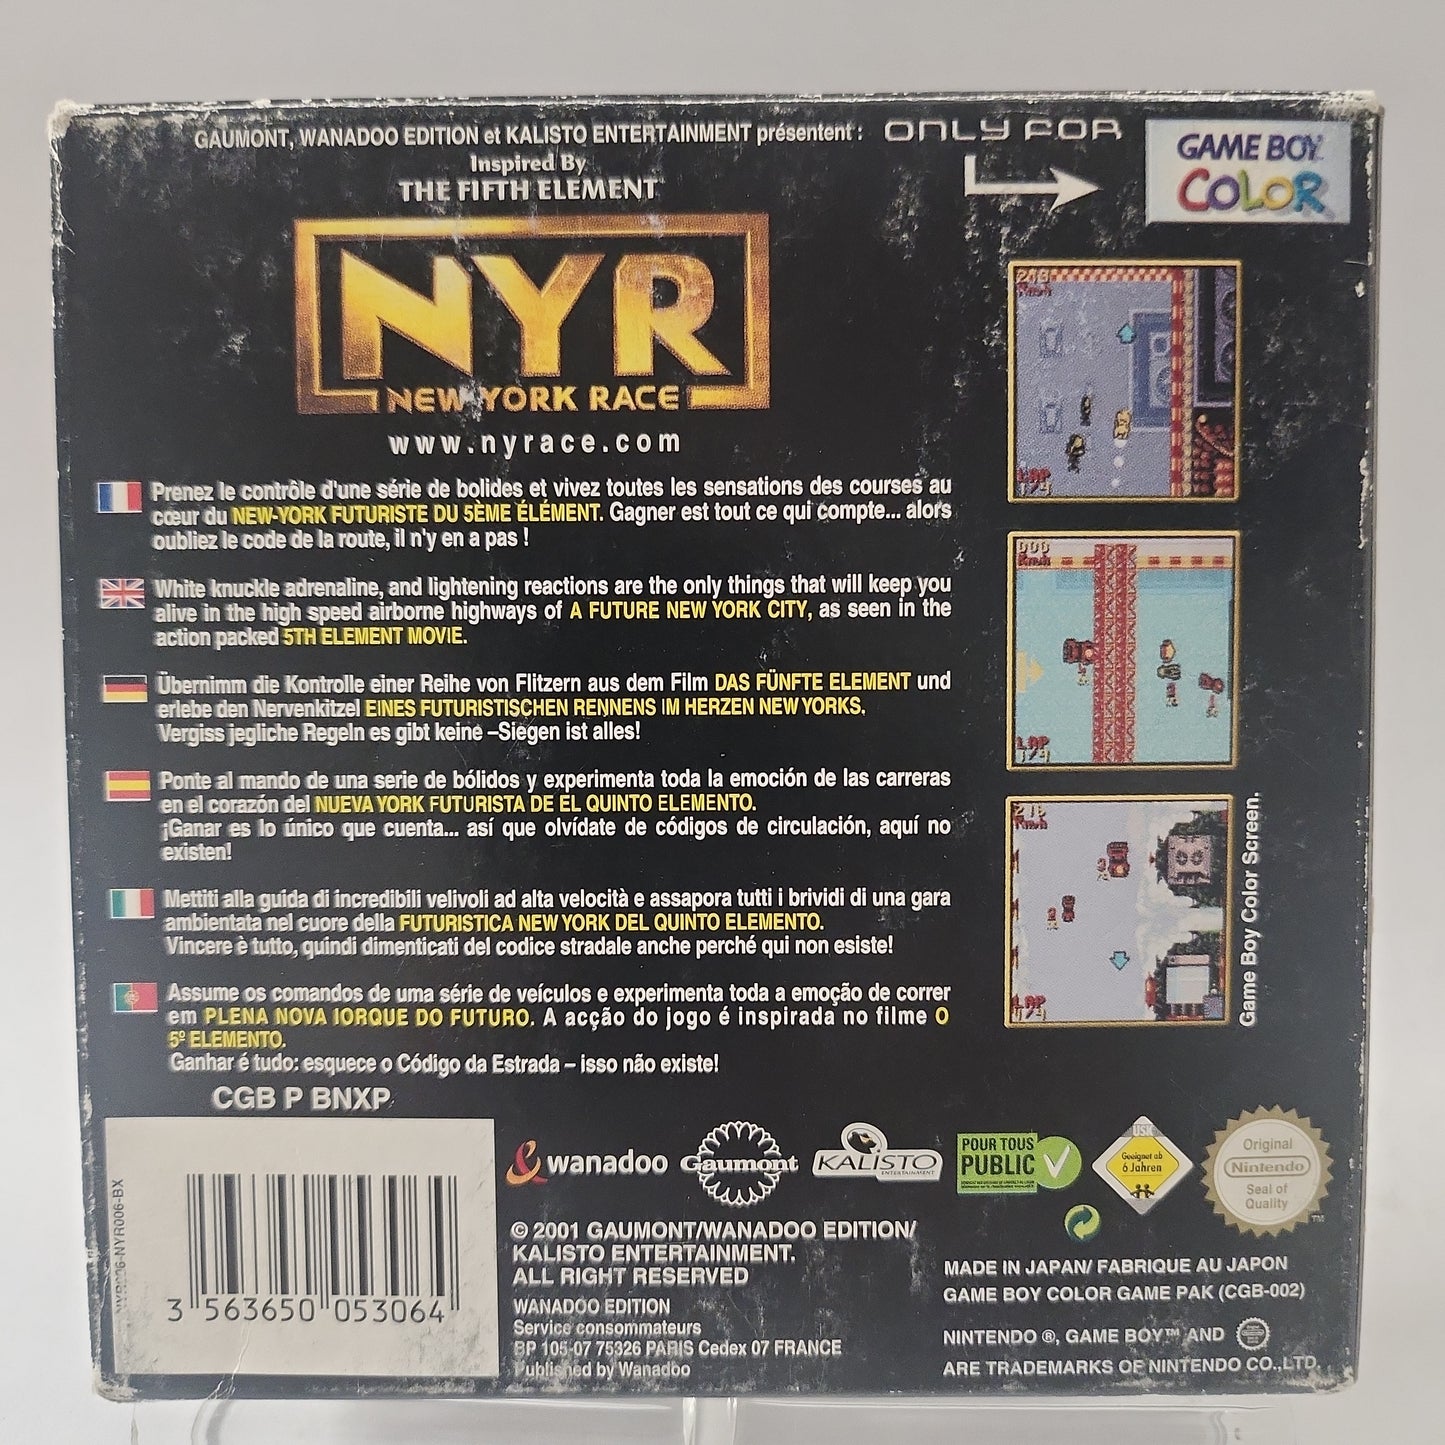 NYR (New York Racer) Boxed Game Boy Color